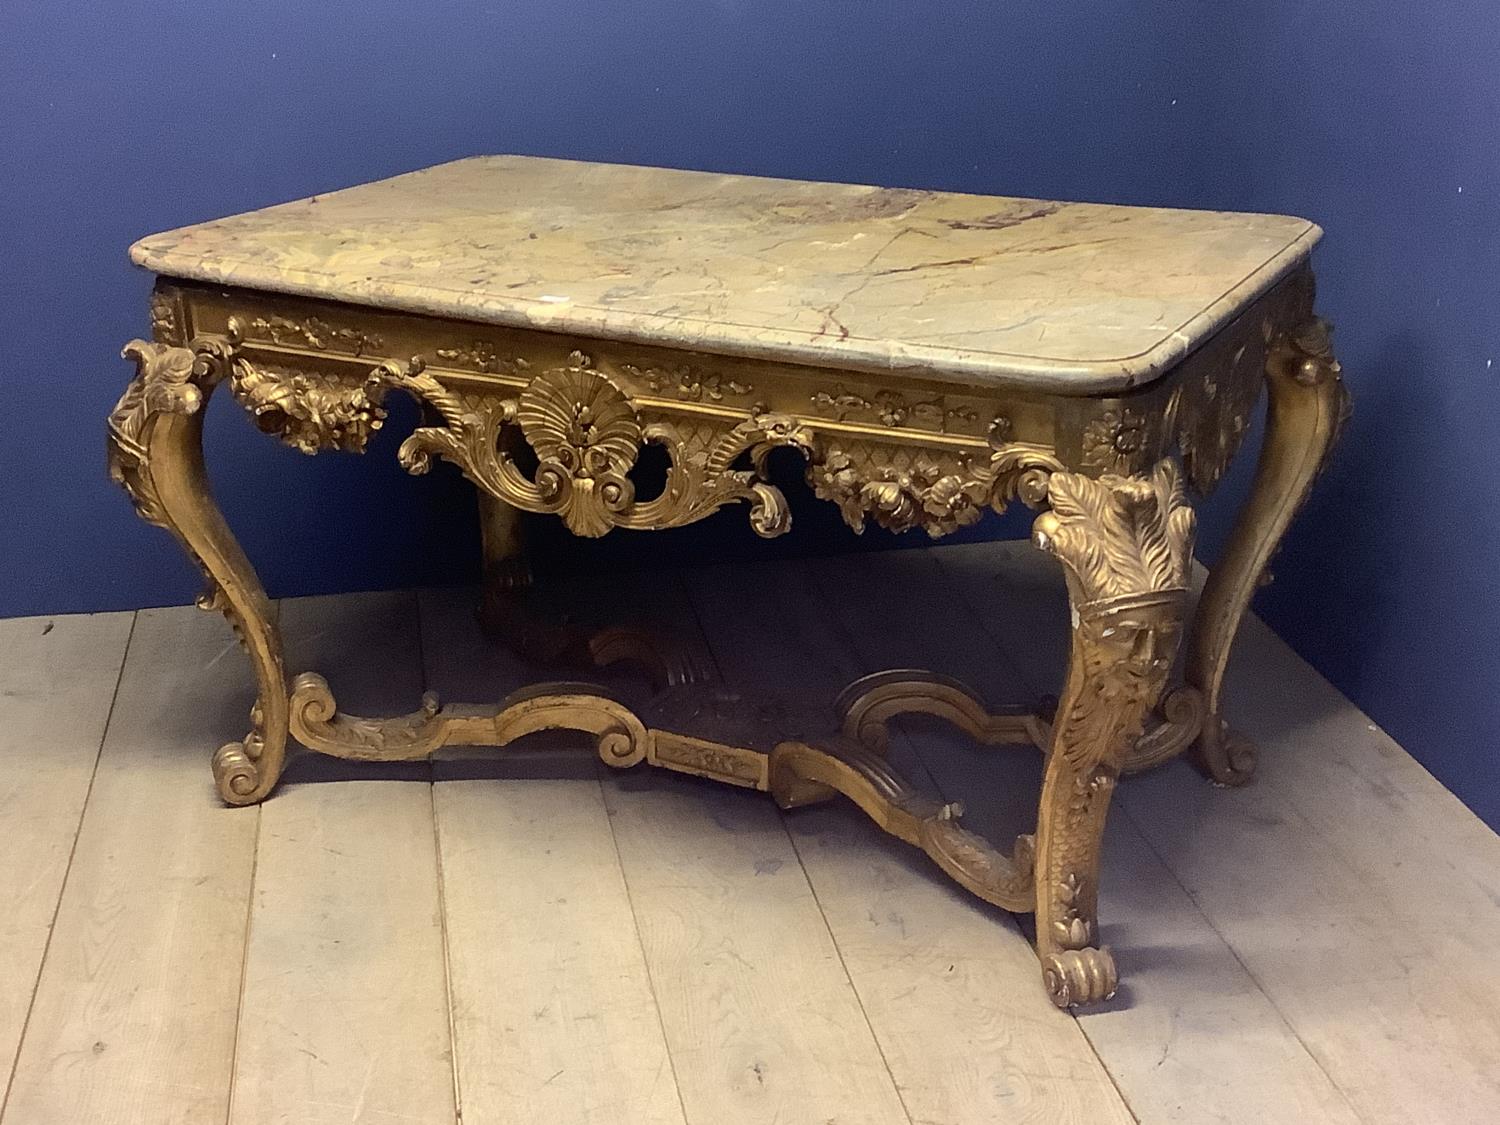 Early C18th/C19th giltwood side table in the manor of William Kent, elaborately carved & gilded unde - Image 12 of 12